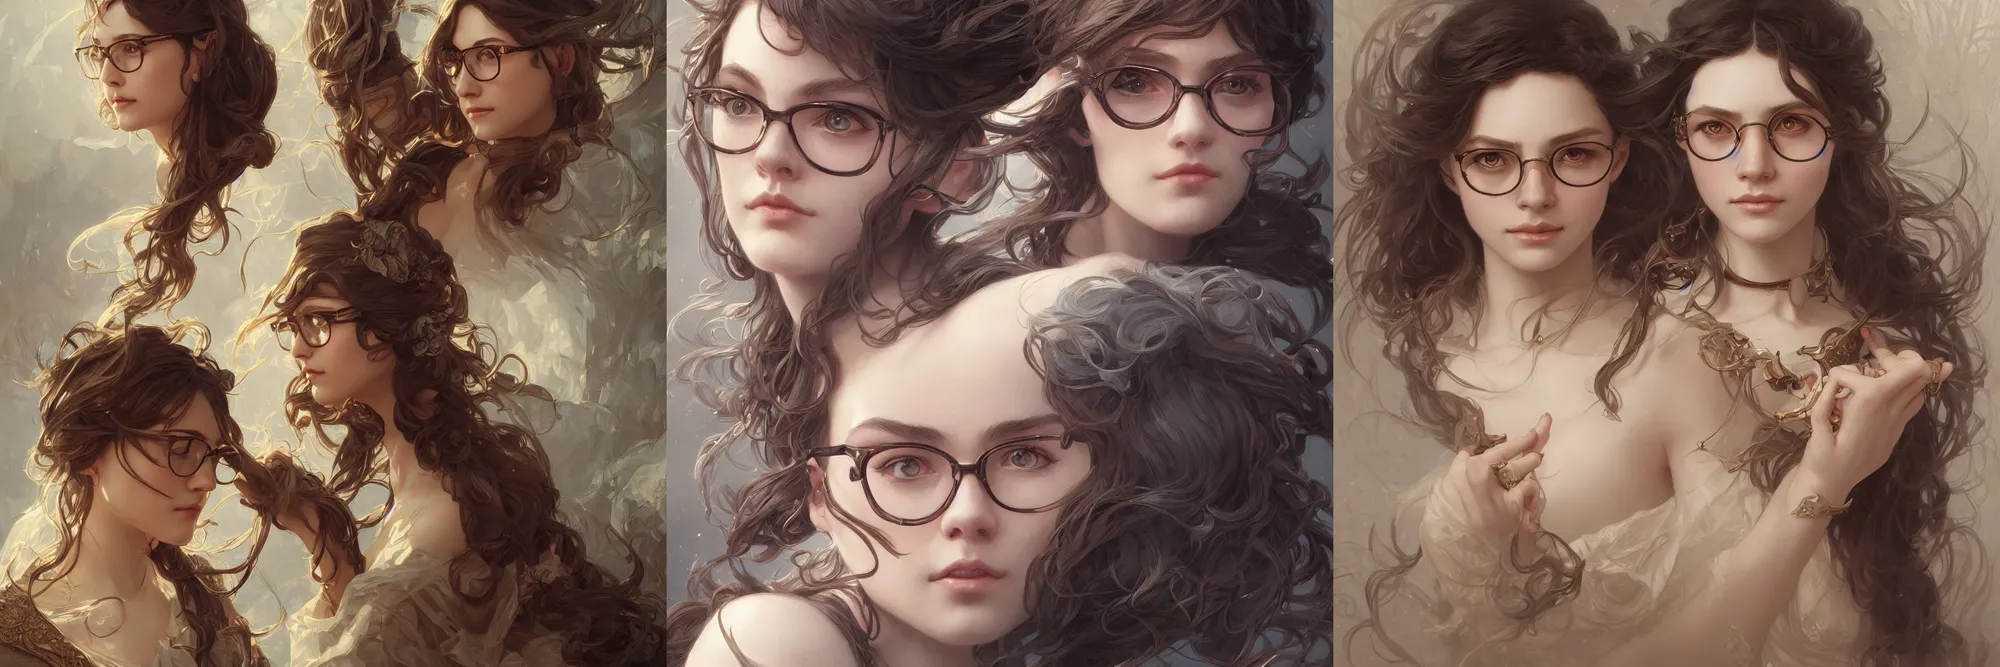 50,000+ Girl With Glasses Pictures | Download Free Images on Unsplash